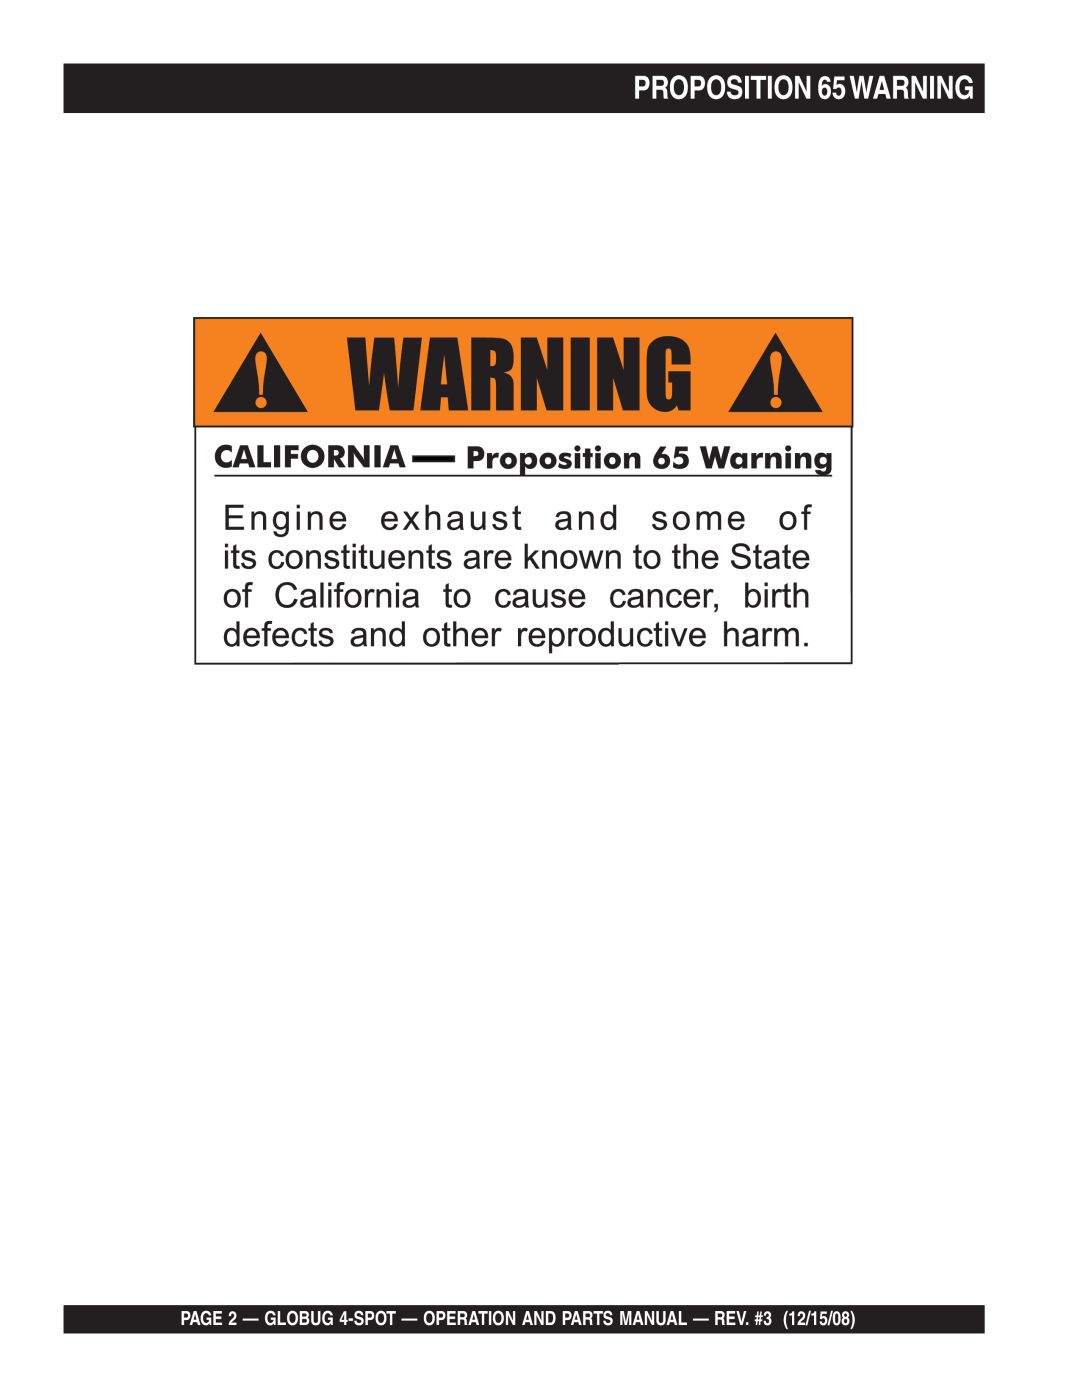 Multiquip gb43sc manual PROPOSITION 65WARNING 